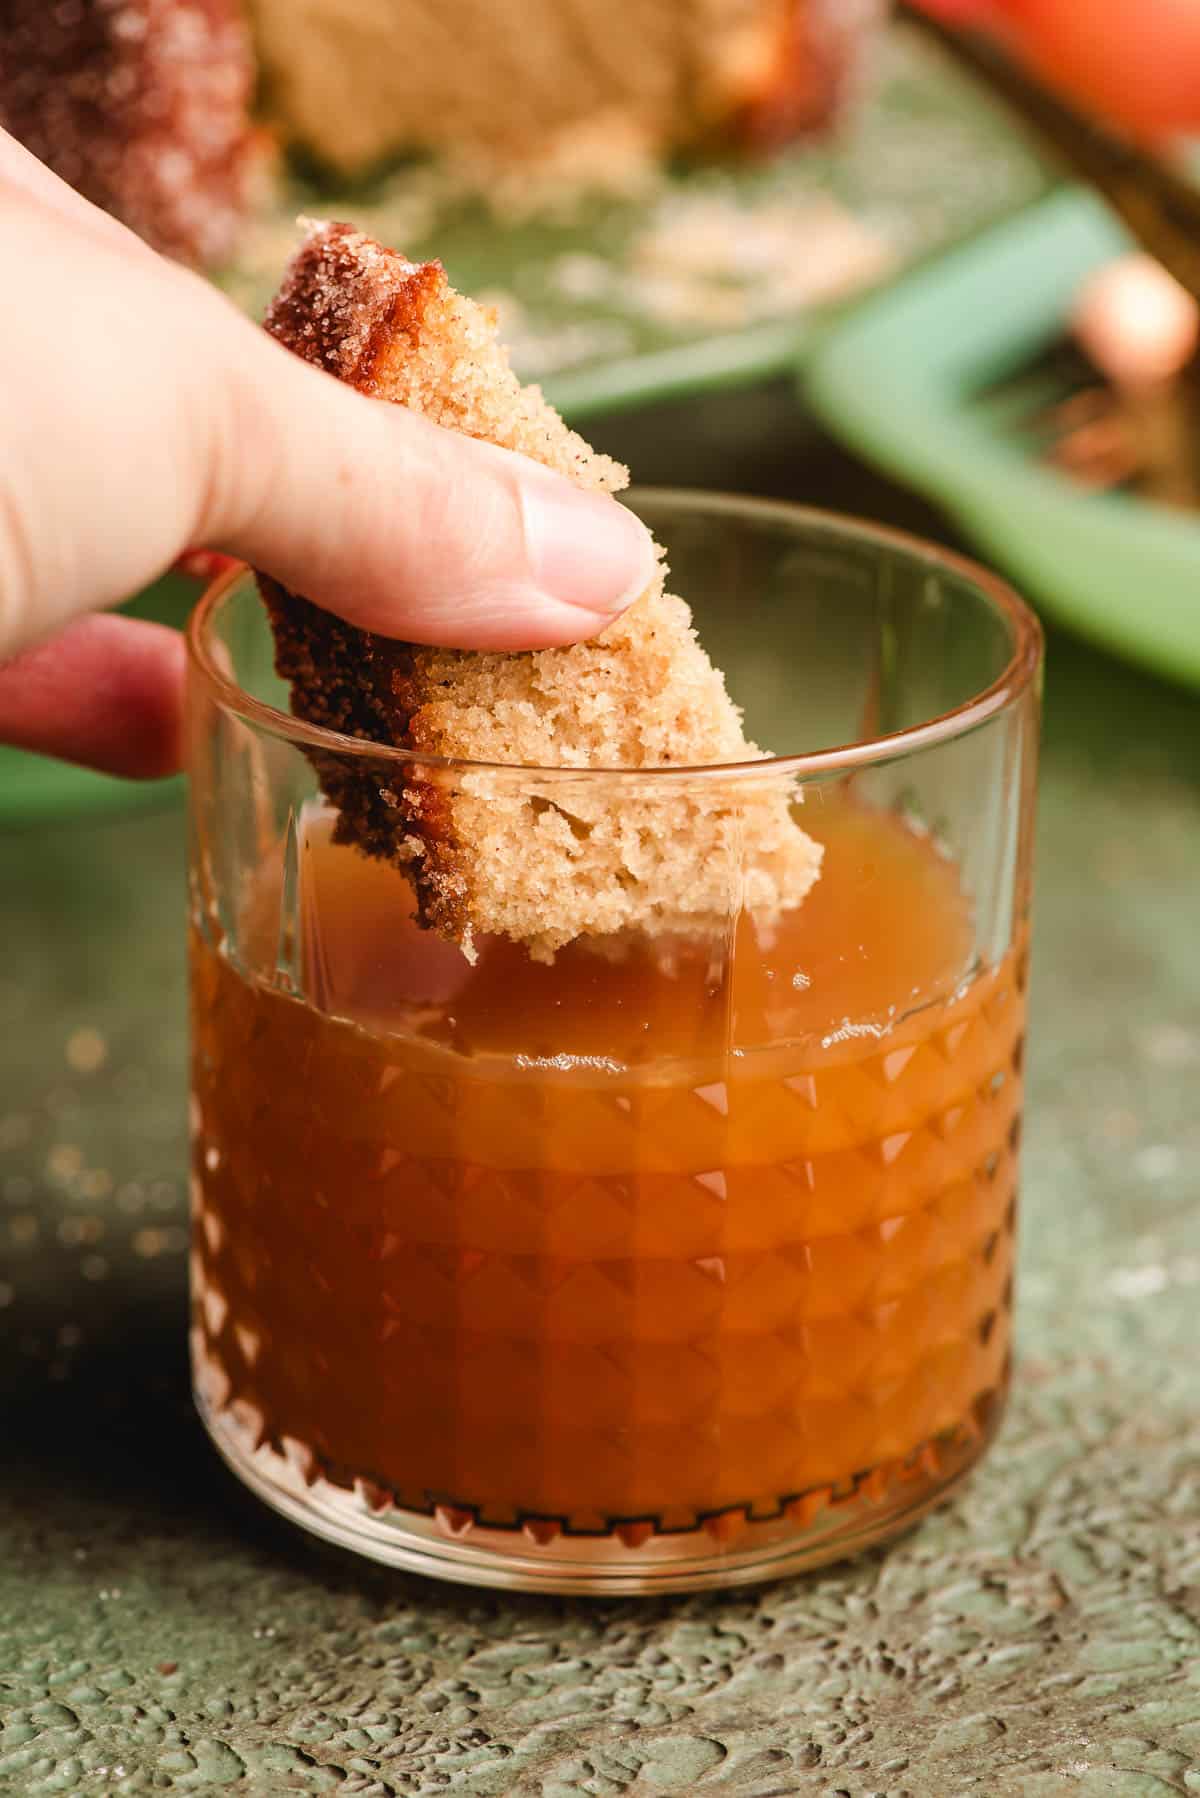 Slice of cider cake being dunked into a glass of apple cider.